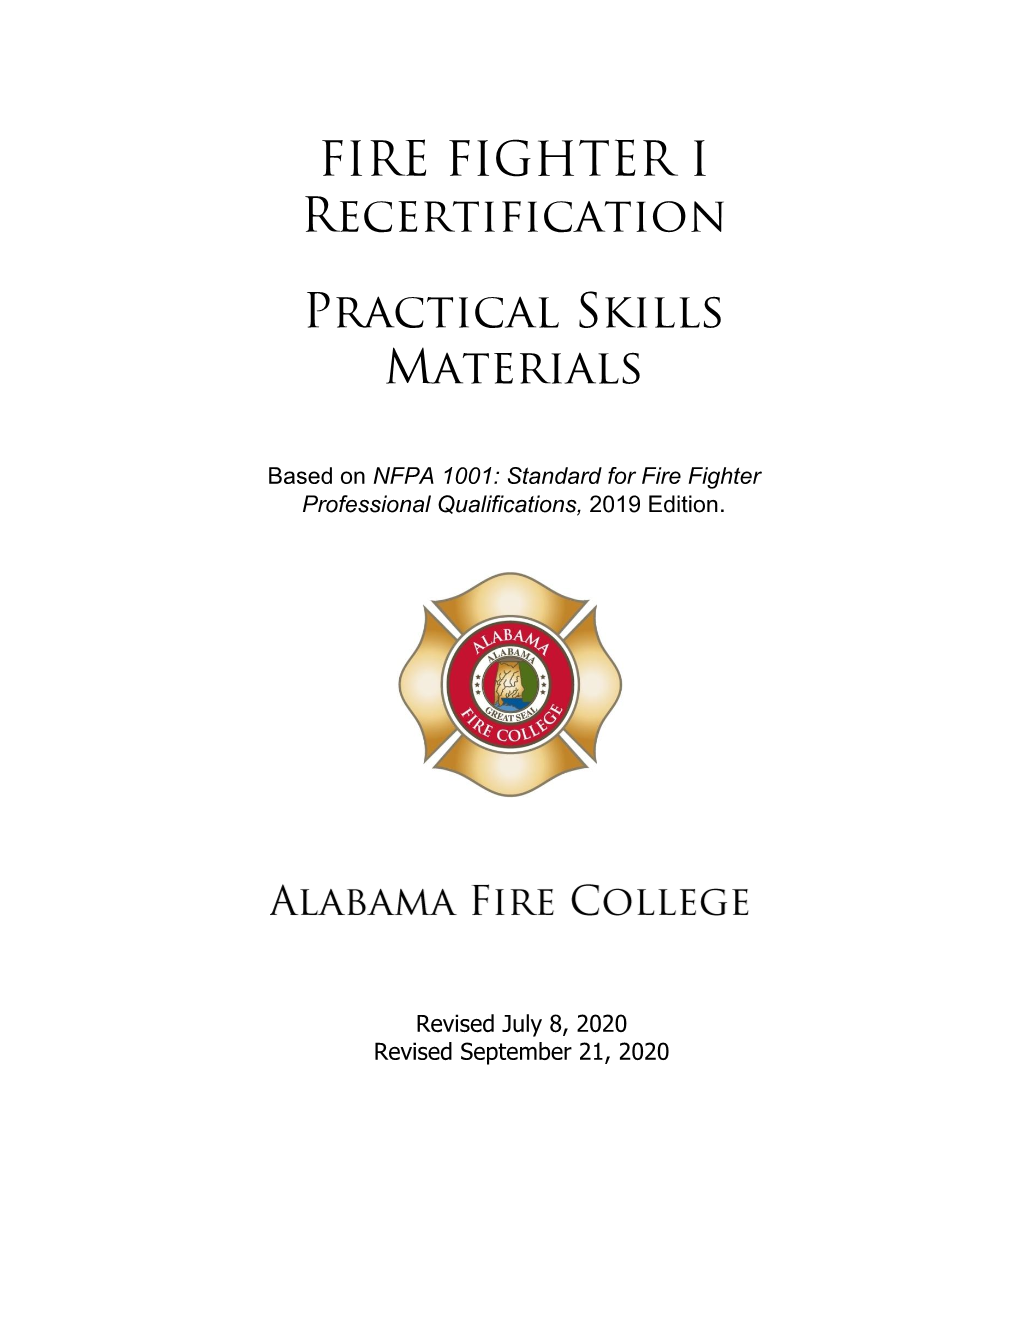 FIRE FIGHTER I Recertification Practical Skills Materials